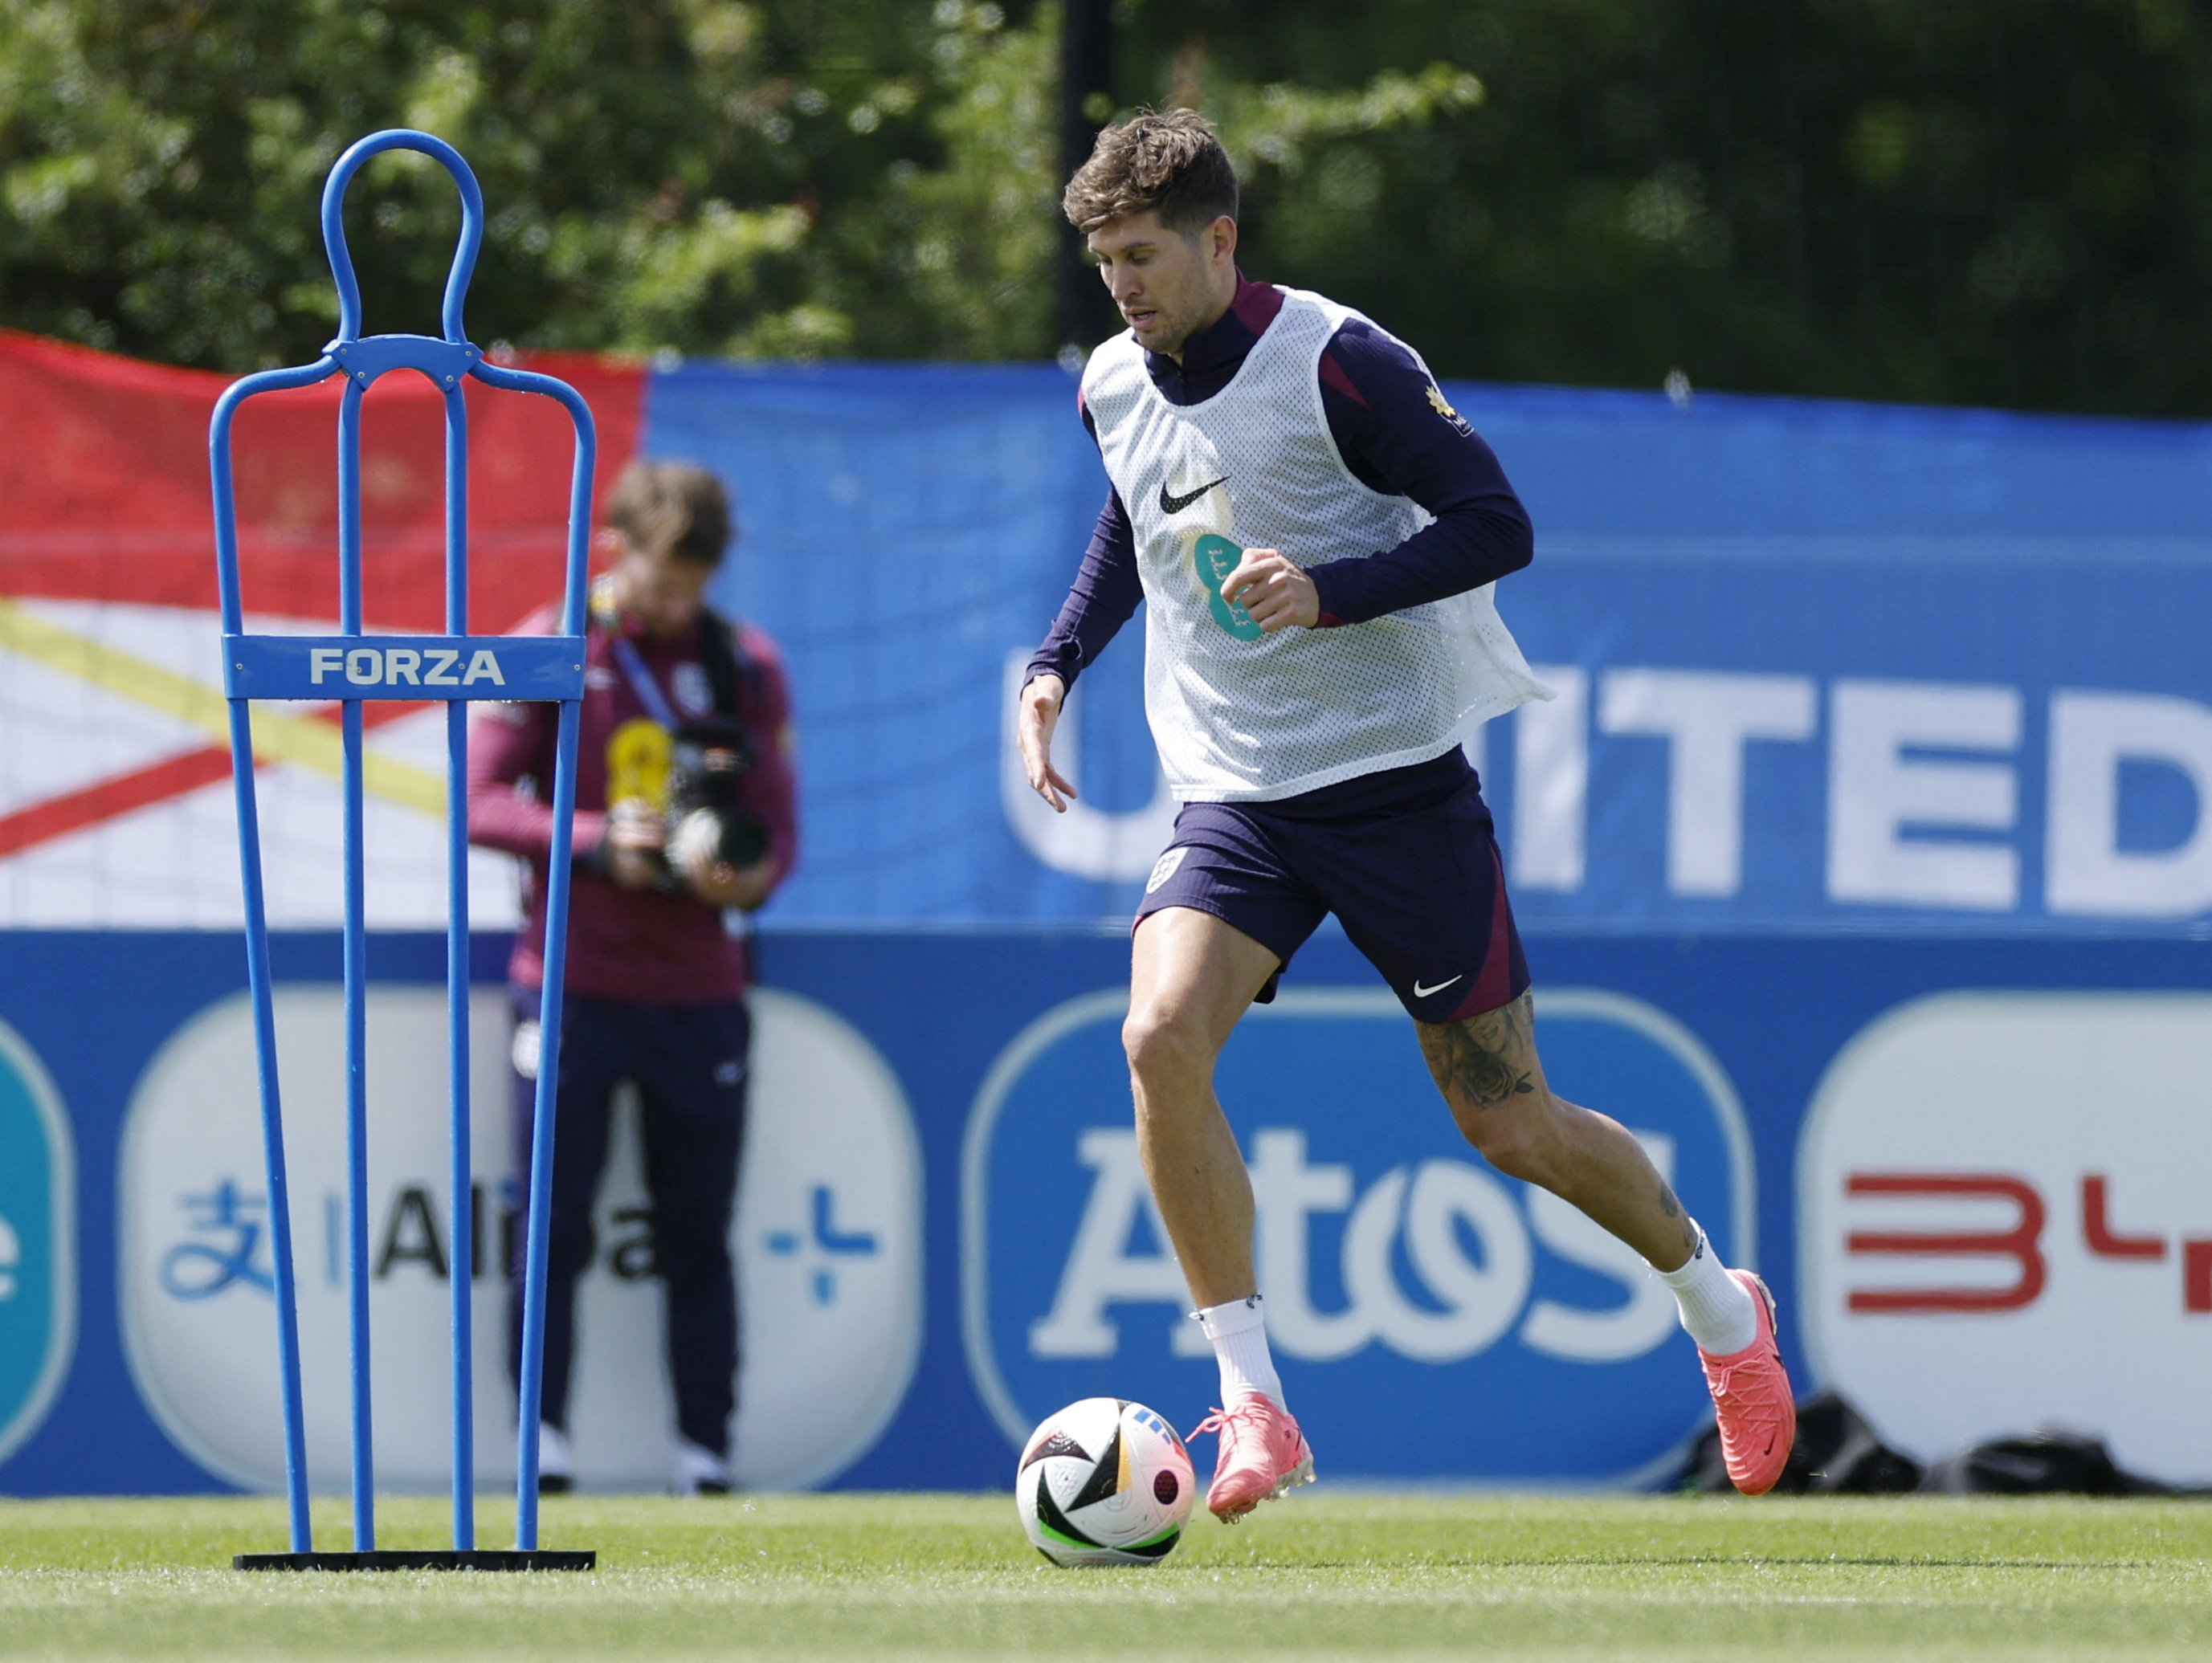 England’s Stones says he is fit for Euro after toe injury fears